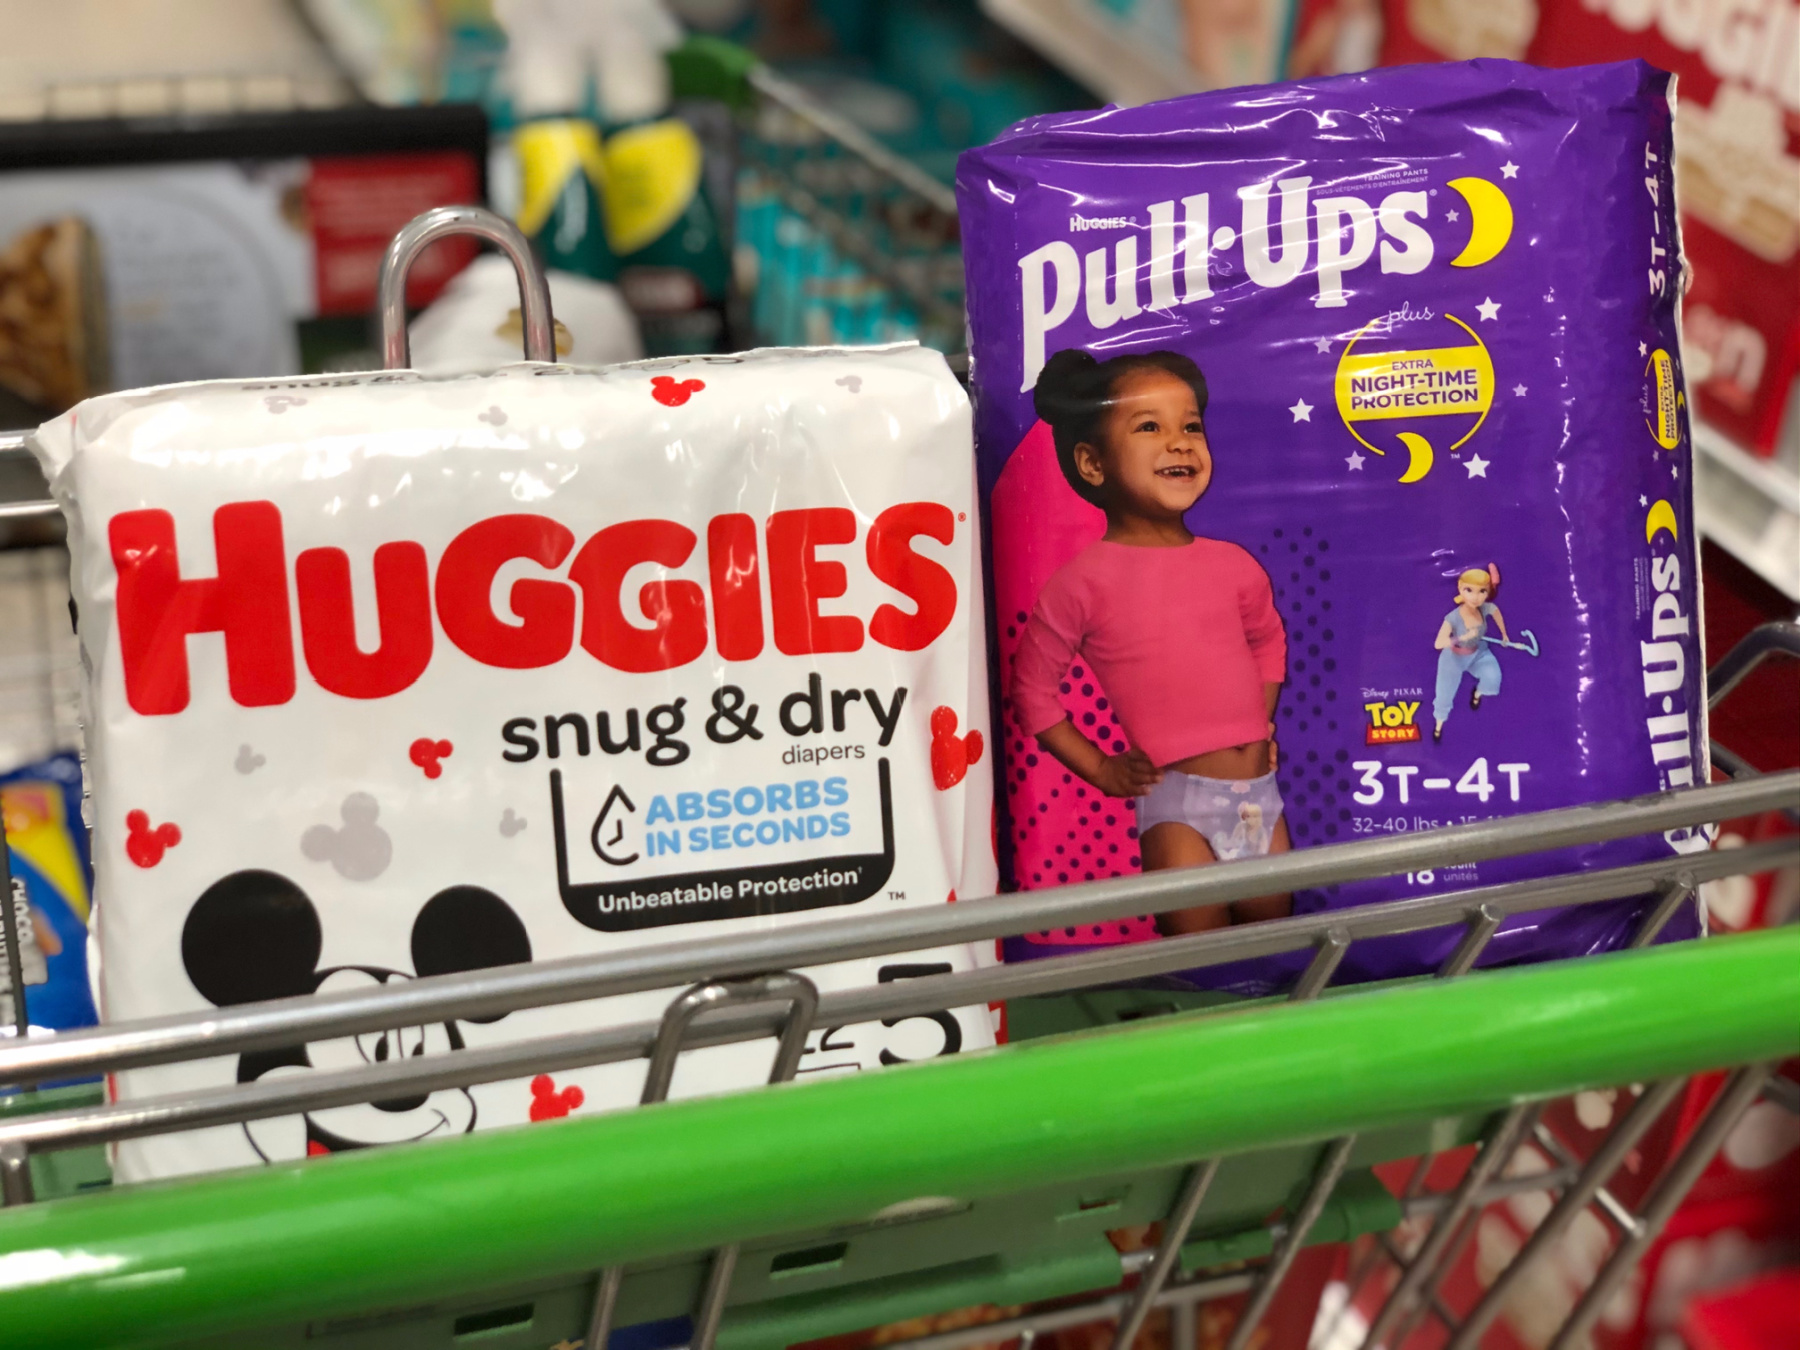 Big Savings On Huggies Diapers And Pull-Ups This Week At Publix - Get Bags For Less Than Half Price! on I Heart Publix